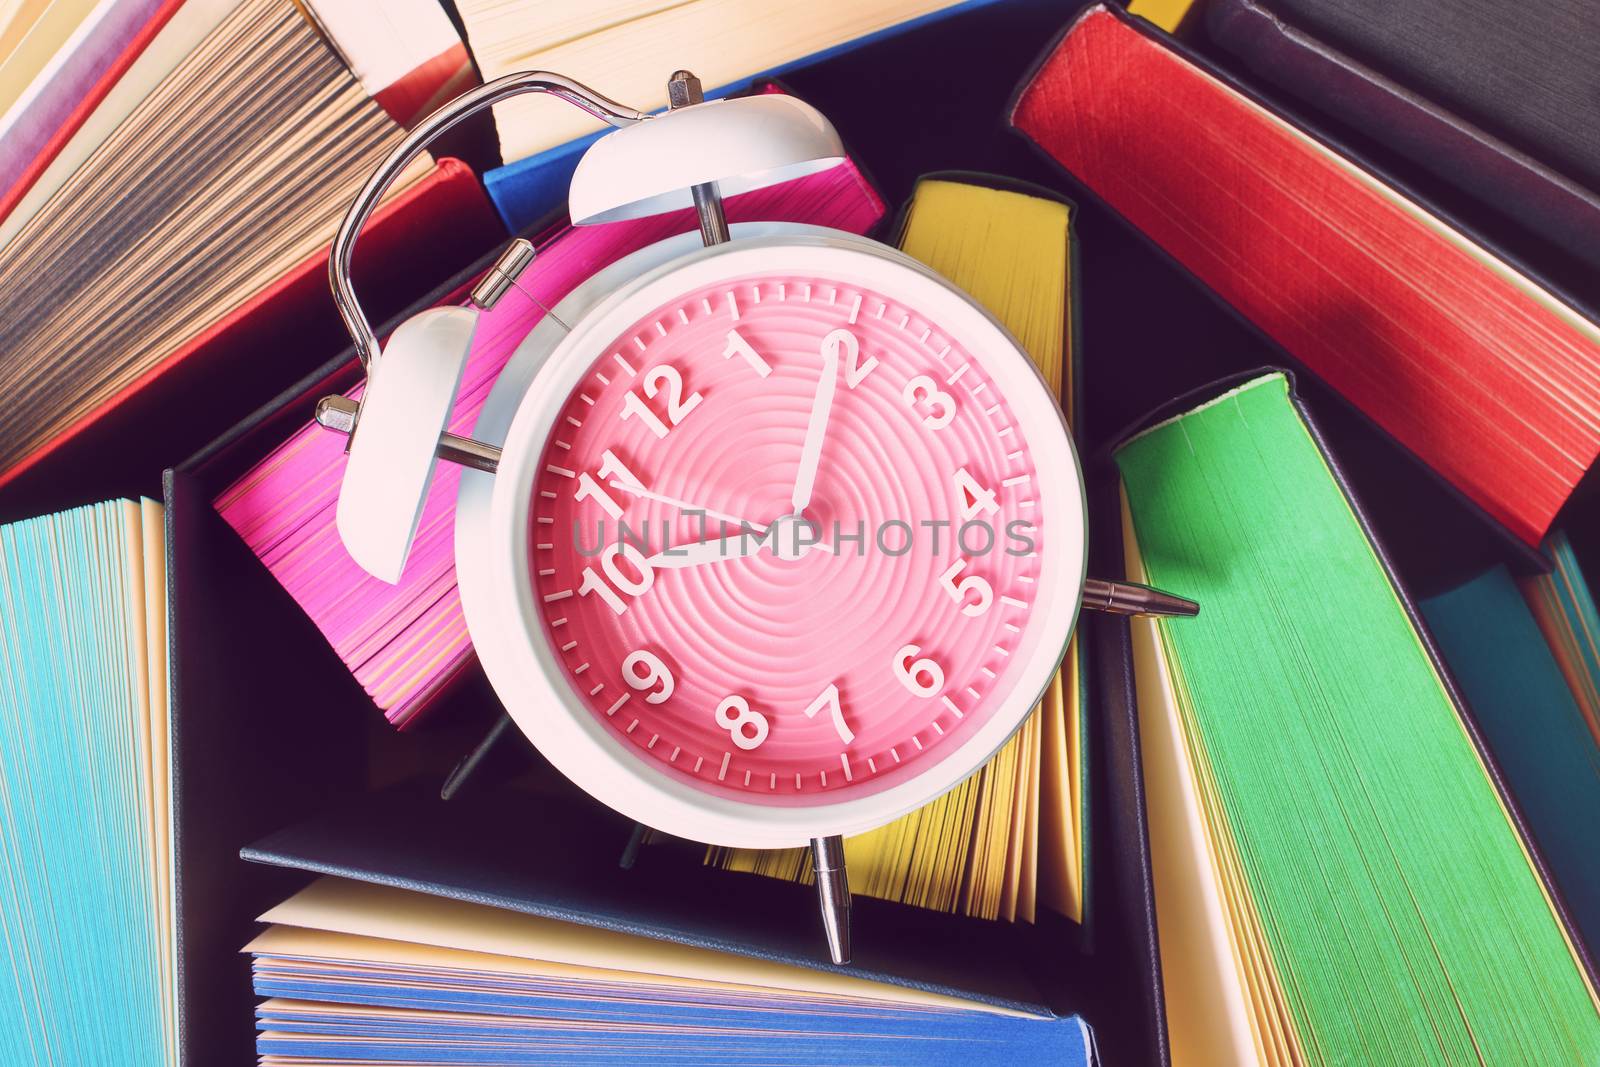 Close up shot of a cute alarm clock on top of open books with multicolored sprayed edges.